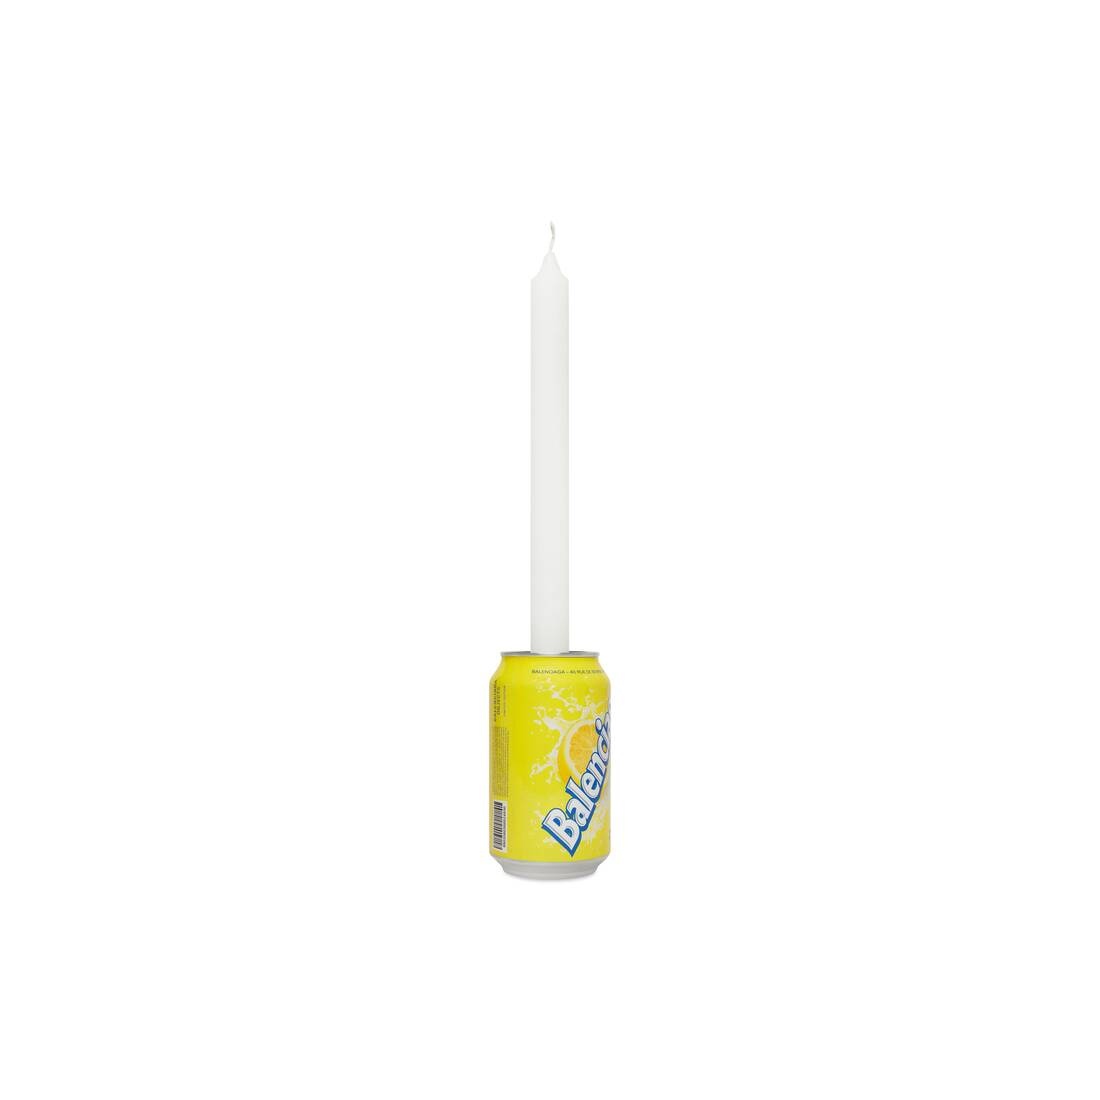 Candle Holder in Yellow - 2